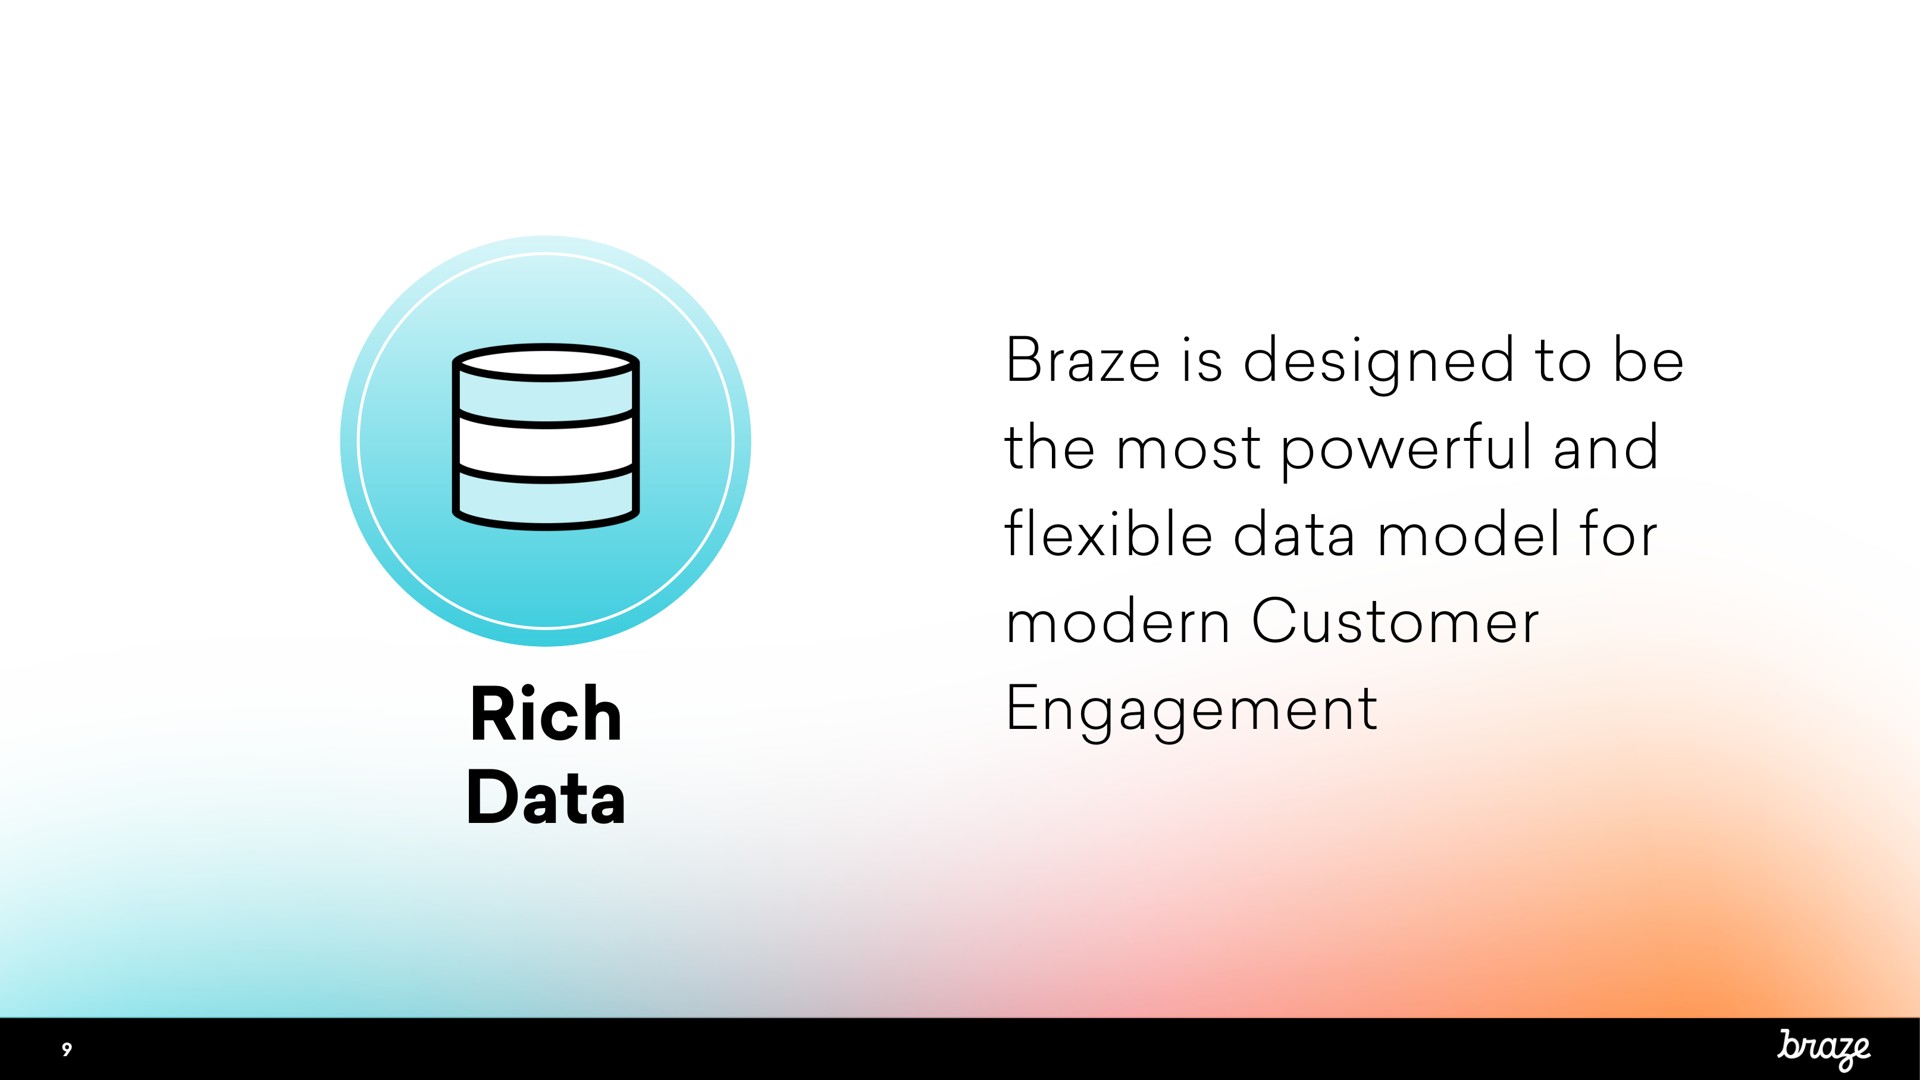 braze is designed to be the most powerful and flexible data model for modern customer engagement rich data | Braze